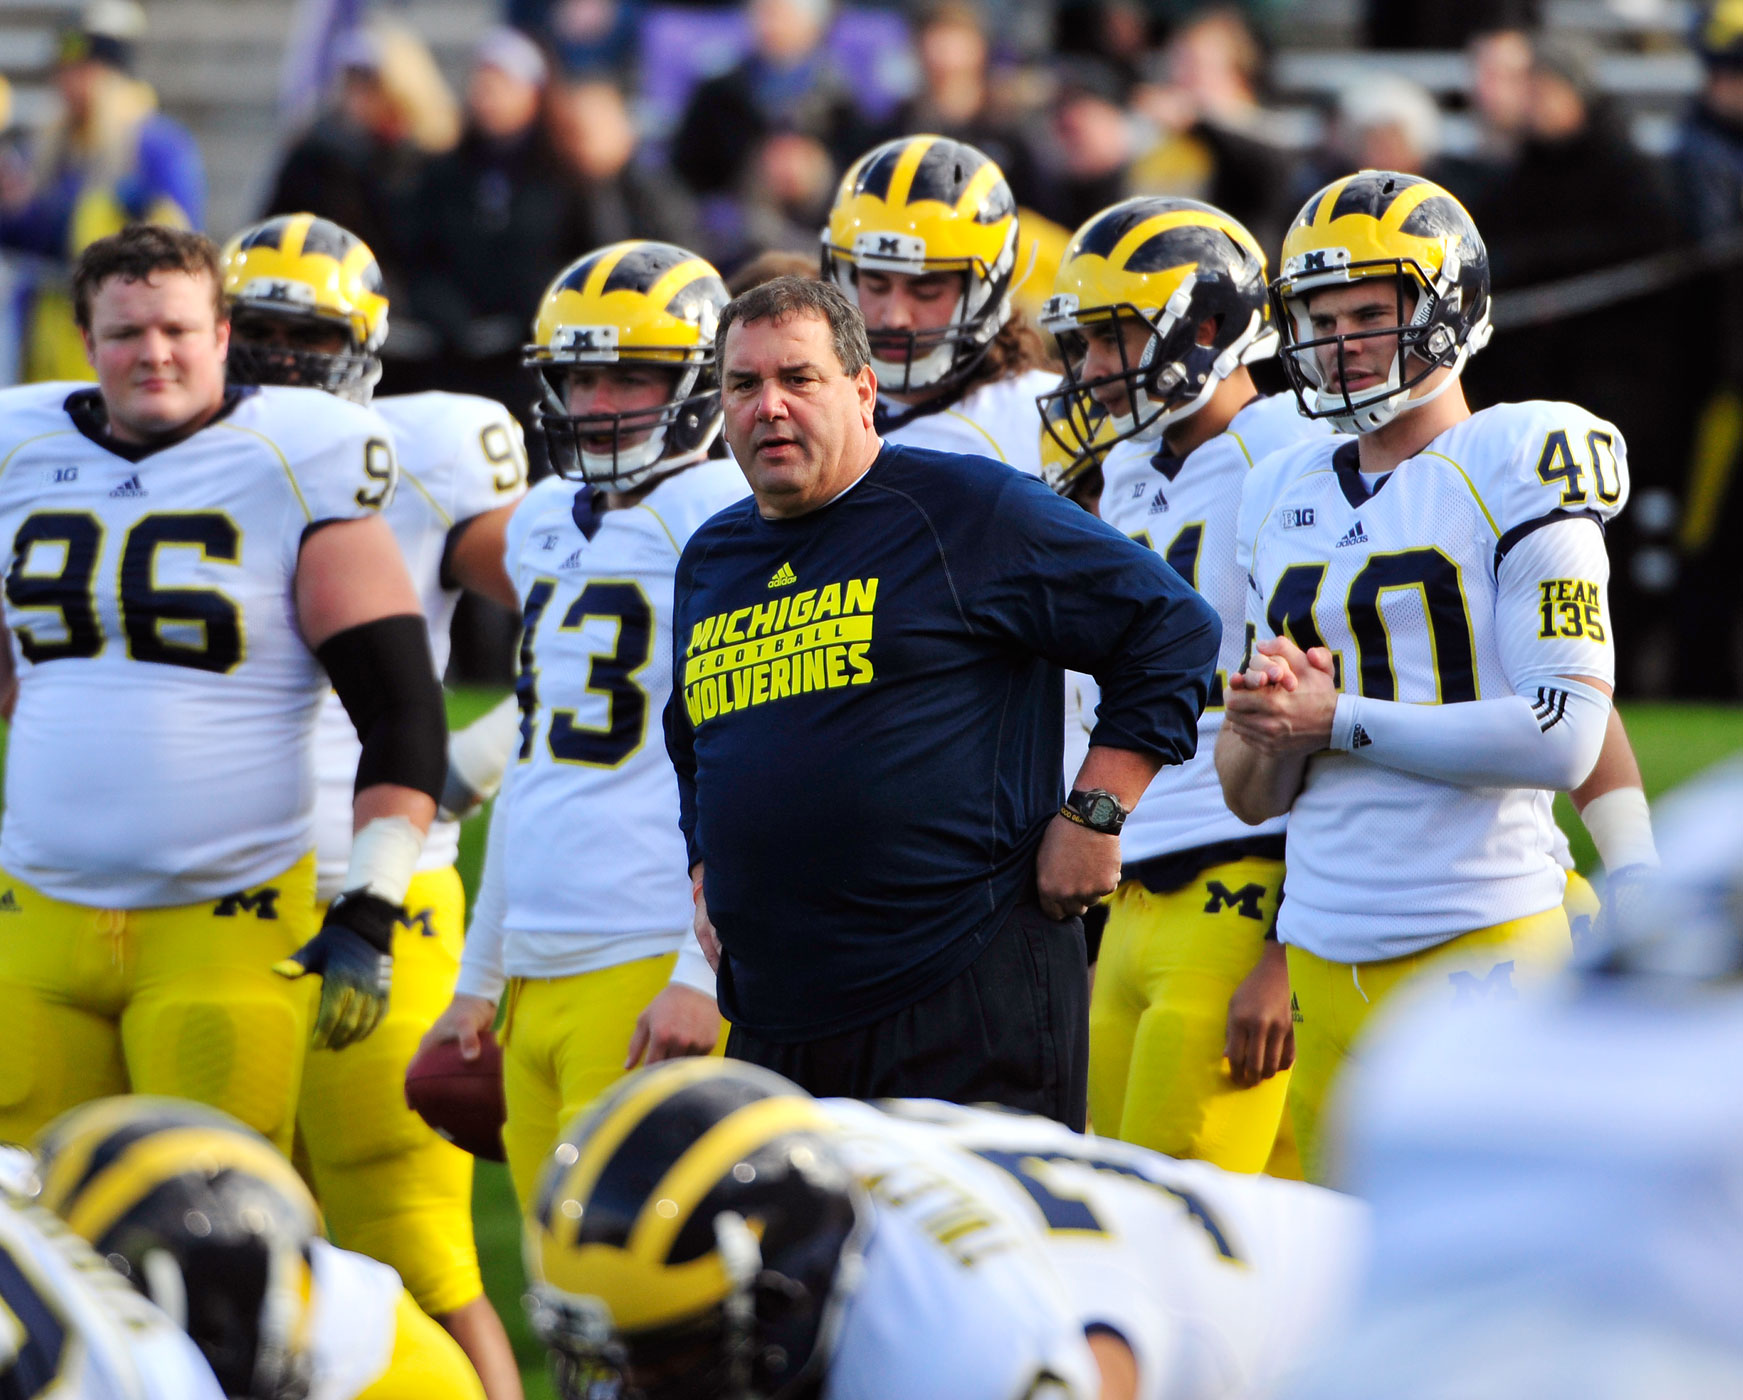 Head coach Brady Hoke of the Michigan Wolverines watches his team warm up before a game against the Northwestern Wildcats on November 8, 2014 at Ryan Field in Evanston, Illinois. (David Banks—Getty Images)